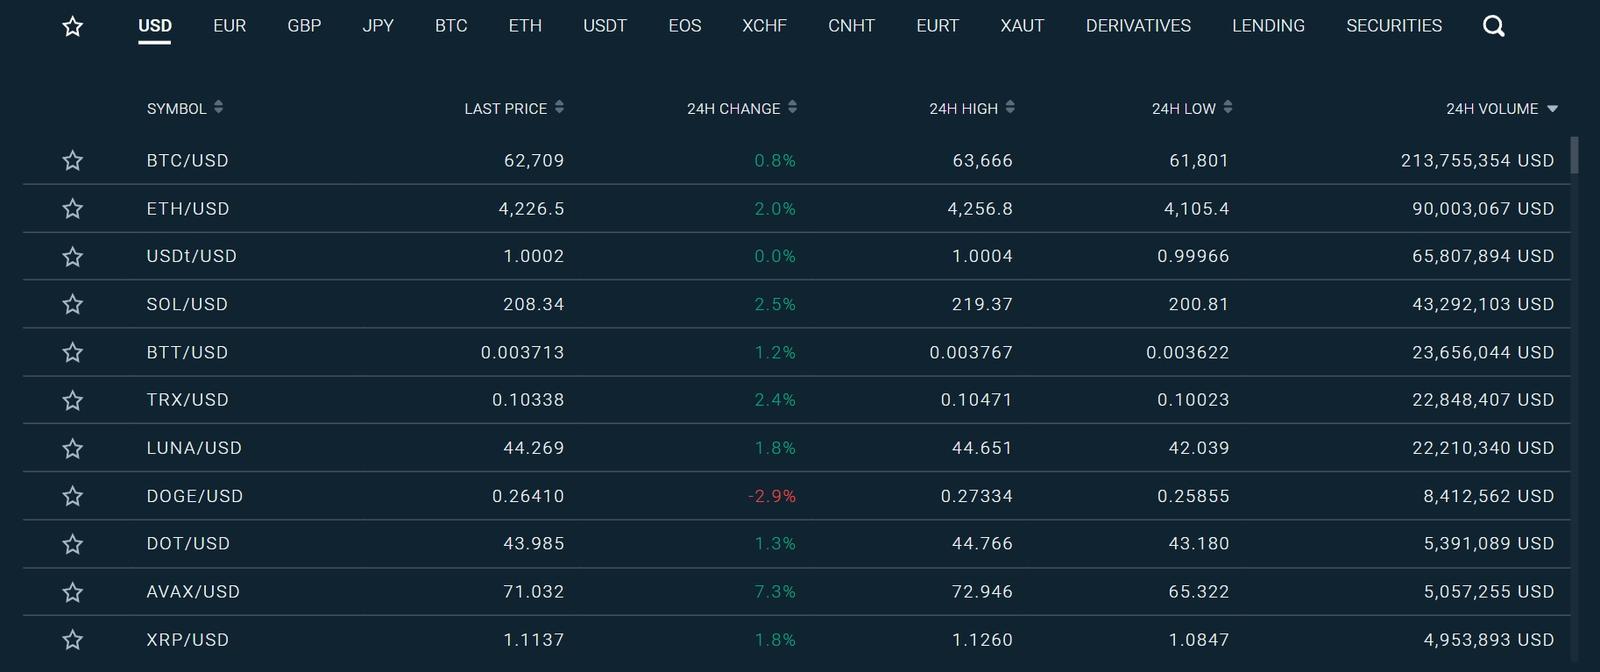 Bitfinex supported markets and assets